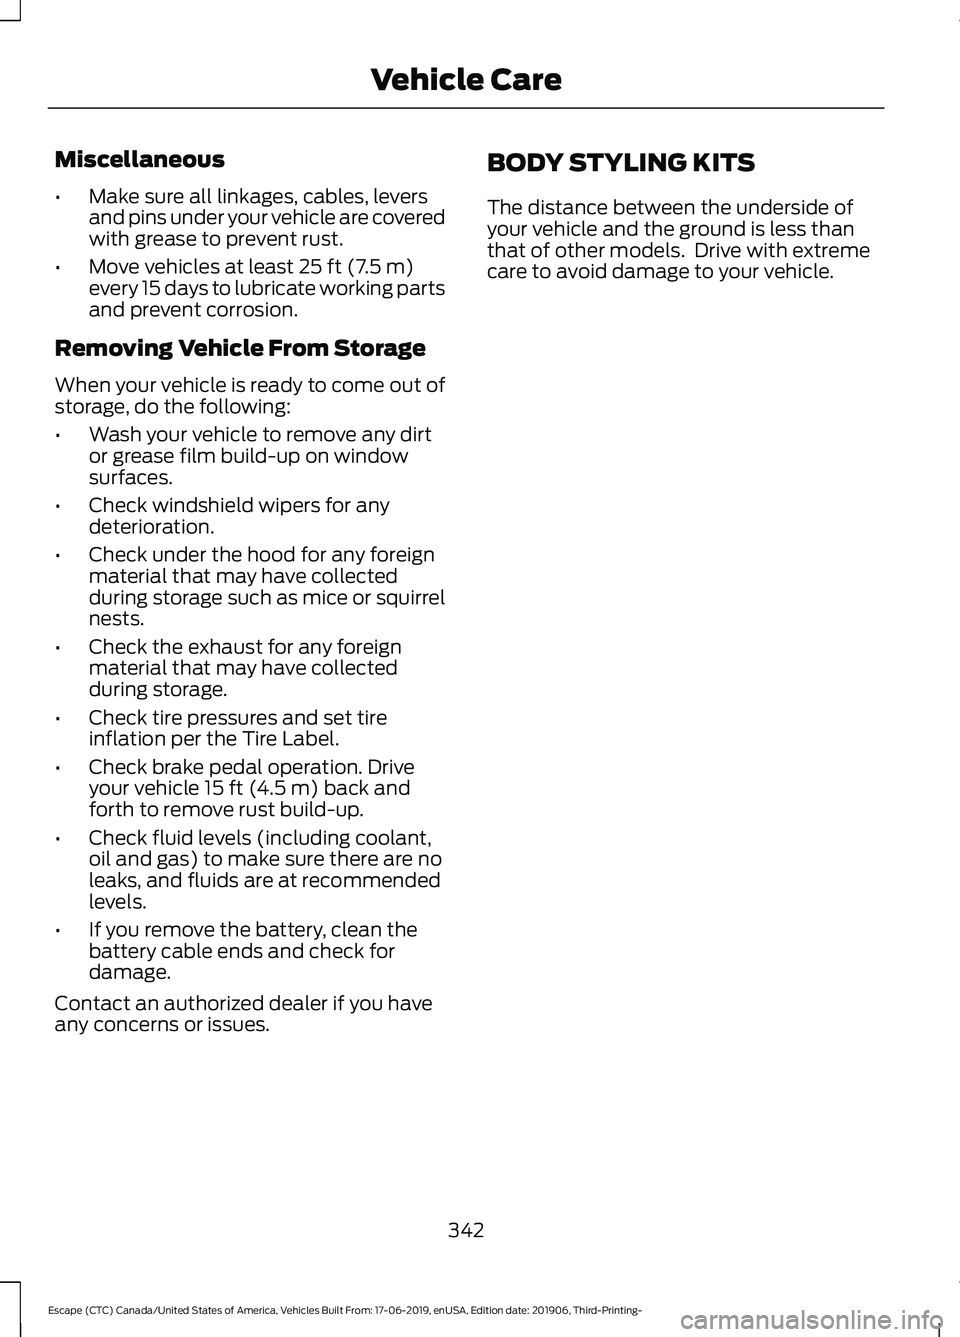 FORD ESCAPE 2020  Owners Manual Miscellaneous
•
Make sure all linkages, cables, levers
and pins under your vehicle are covered
with grease to prevent rust.
• Move vehicles at least 25 ft (7.5 m)
every 15 days to lubricate workin